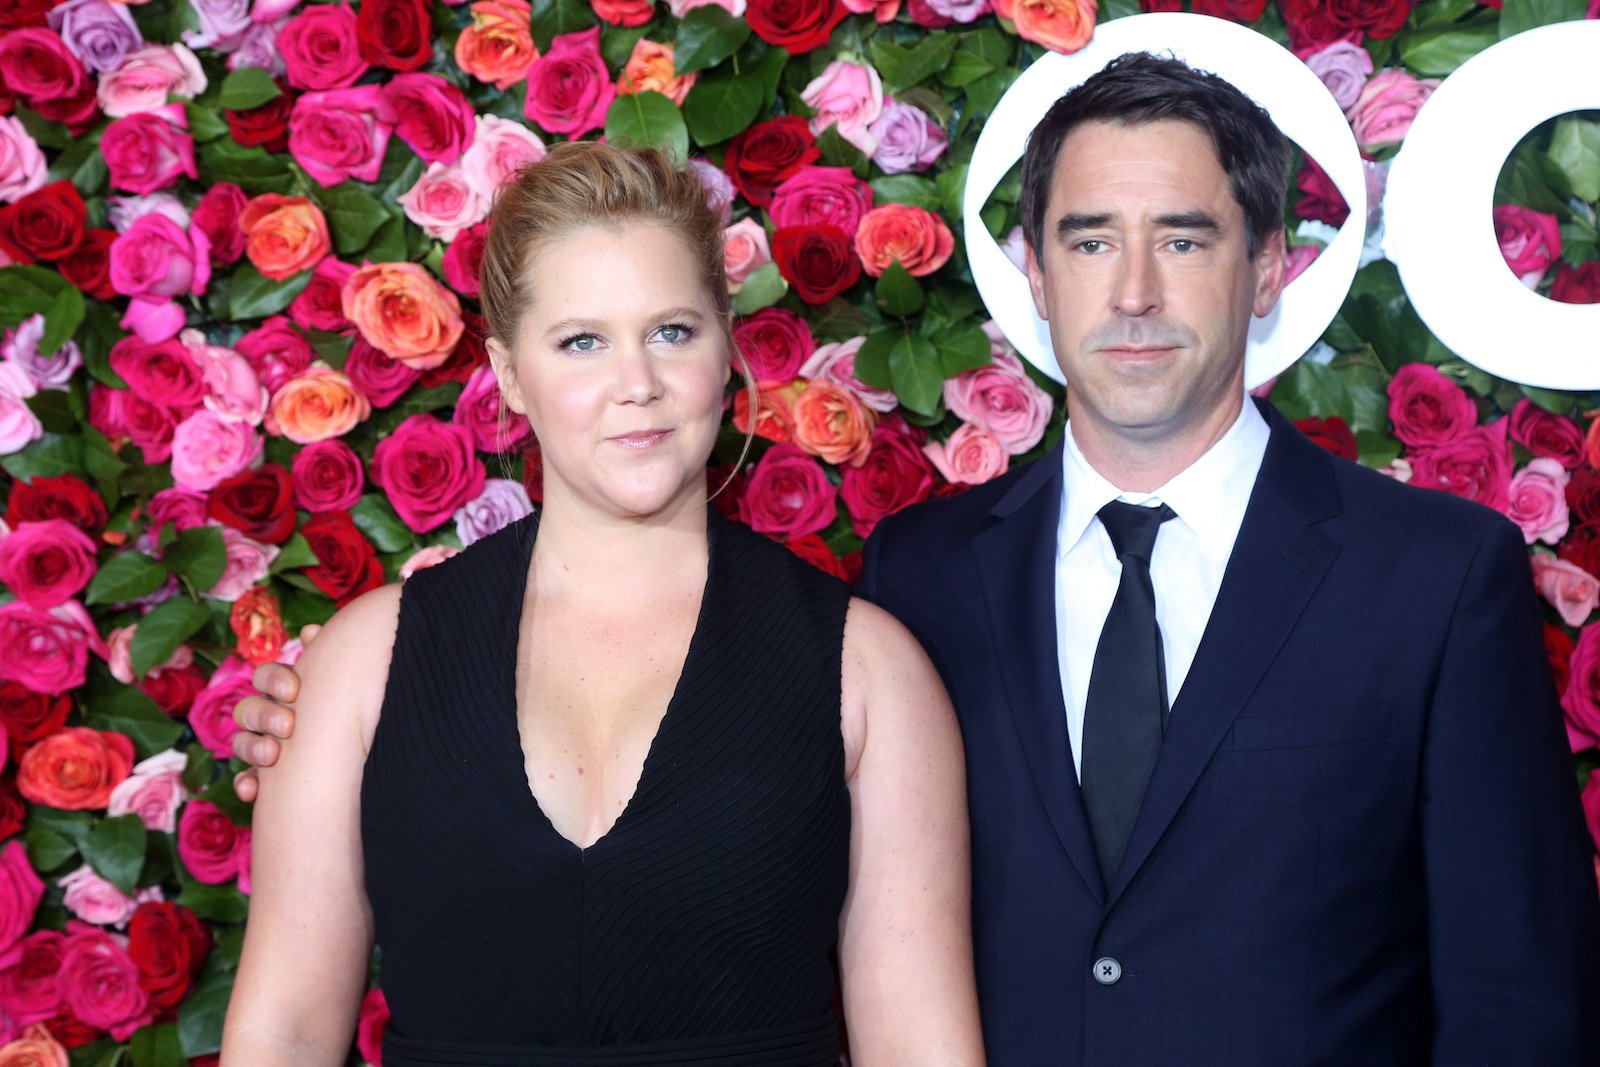 Amy Schumer and Chris Fischer attend the 2018 Tony Awards